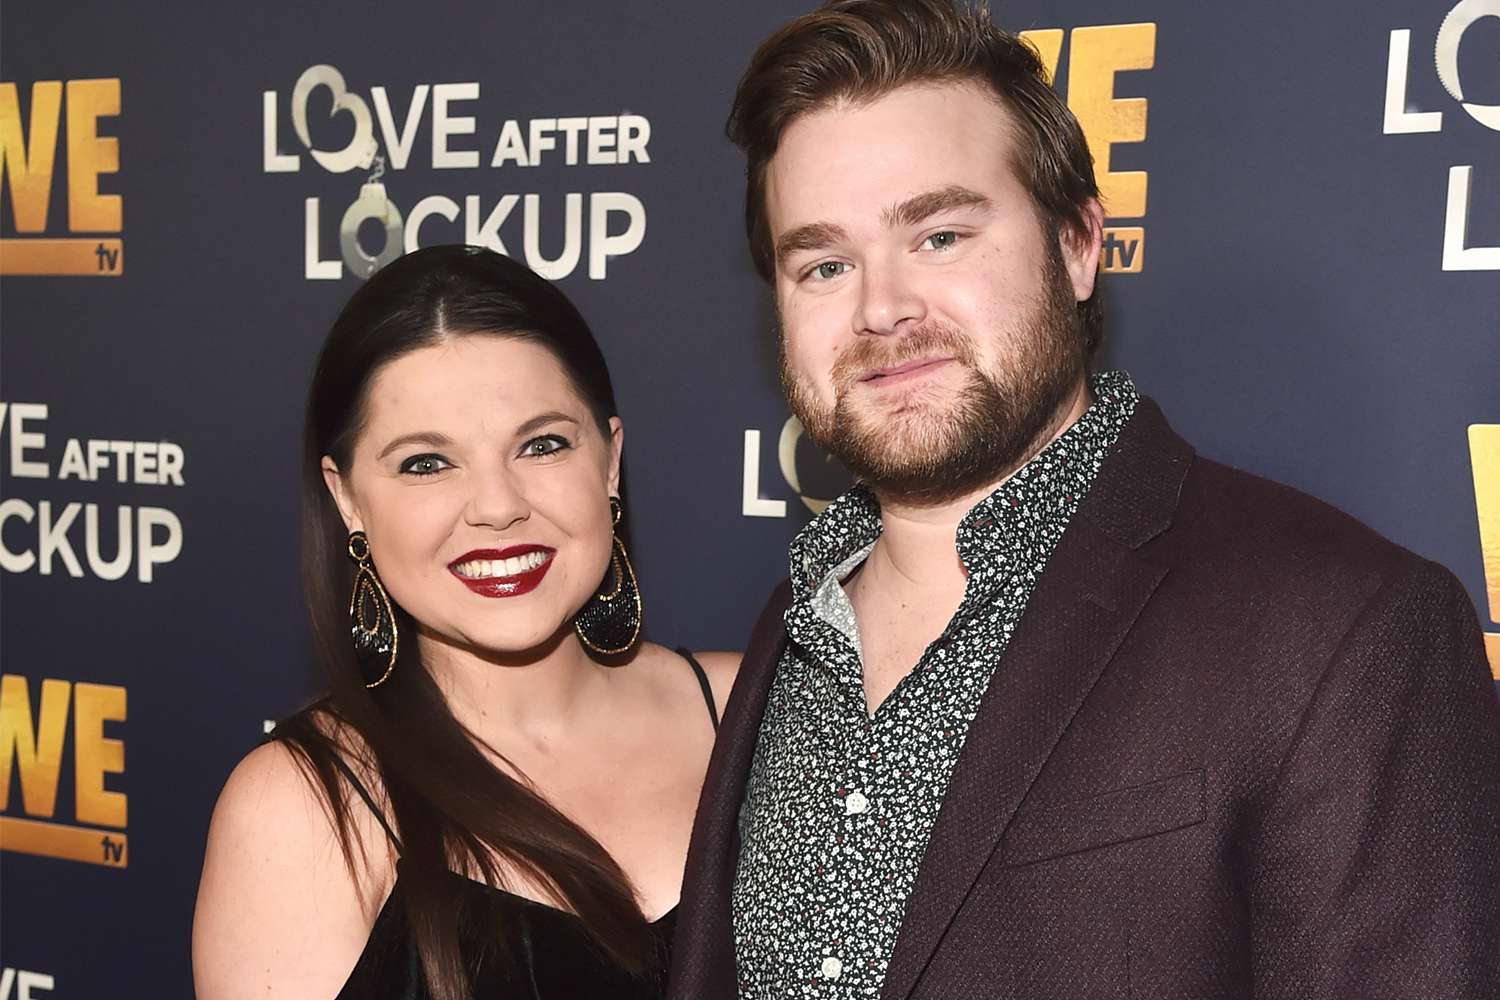 Amy Duggar and Dillon King BEVERLY HILLS, CA - DECEMBER 11: Amy Duggar (L) and Dillon King attend WE tv celebrates the return of "Love After Lockup" with panel, "Real Love: Relationship Reality TV's Past, Present & Future," at The Paley Center for Media on December 11, 2018 in Beverly Hills, California. (Photo by Alberto E. Rodriguez/Getty Images for WE tv)